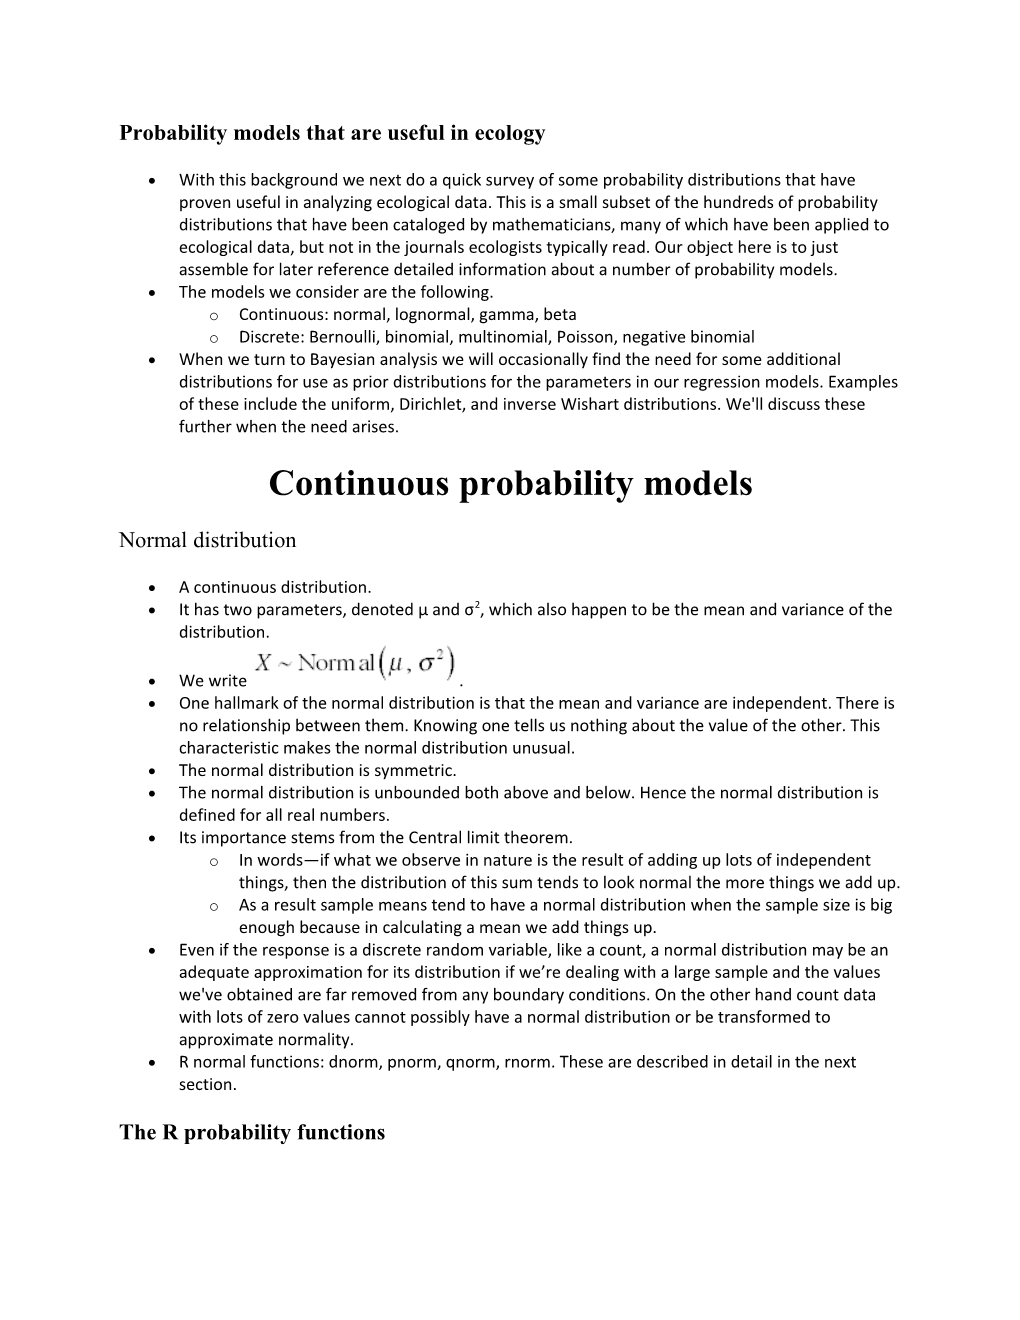 Probability Models That Are Useful in Ecology